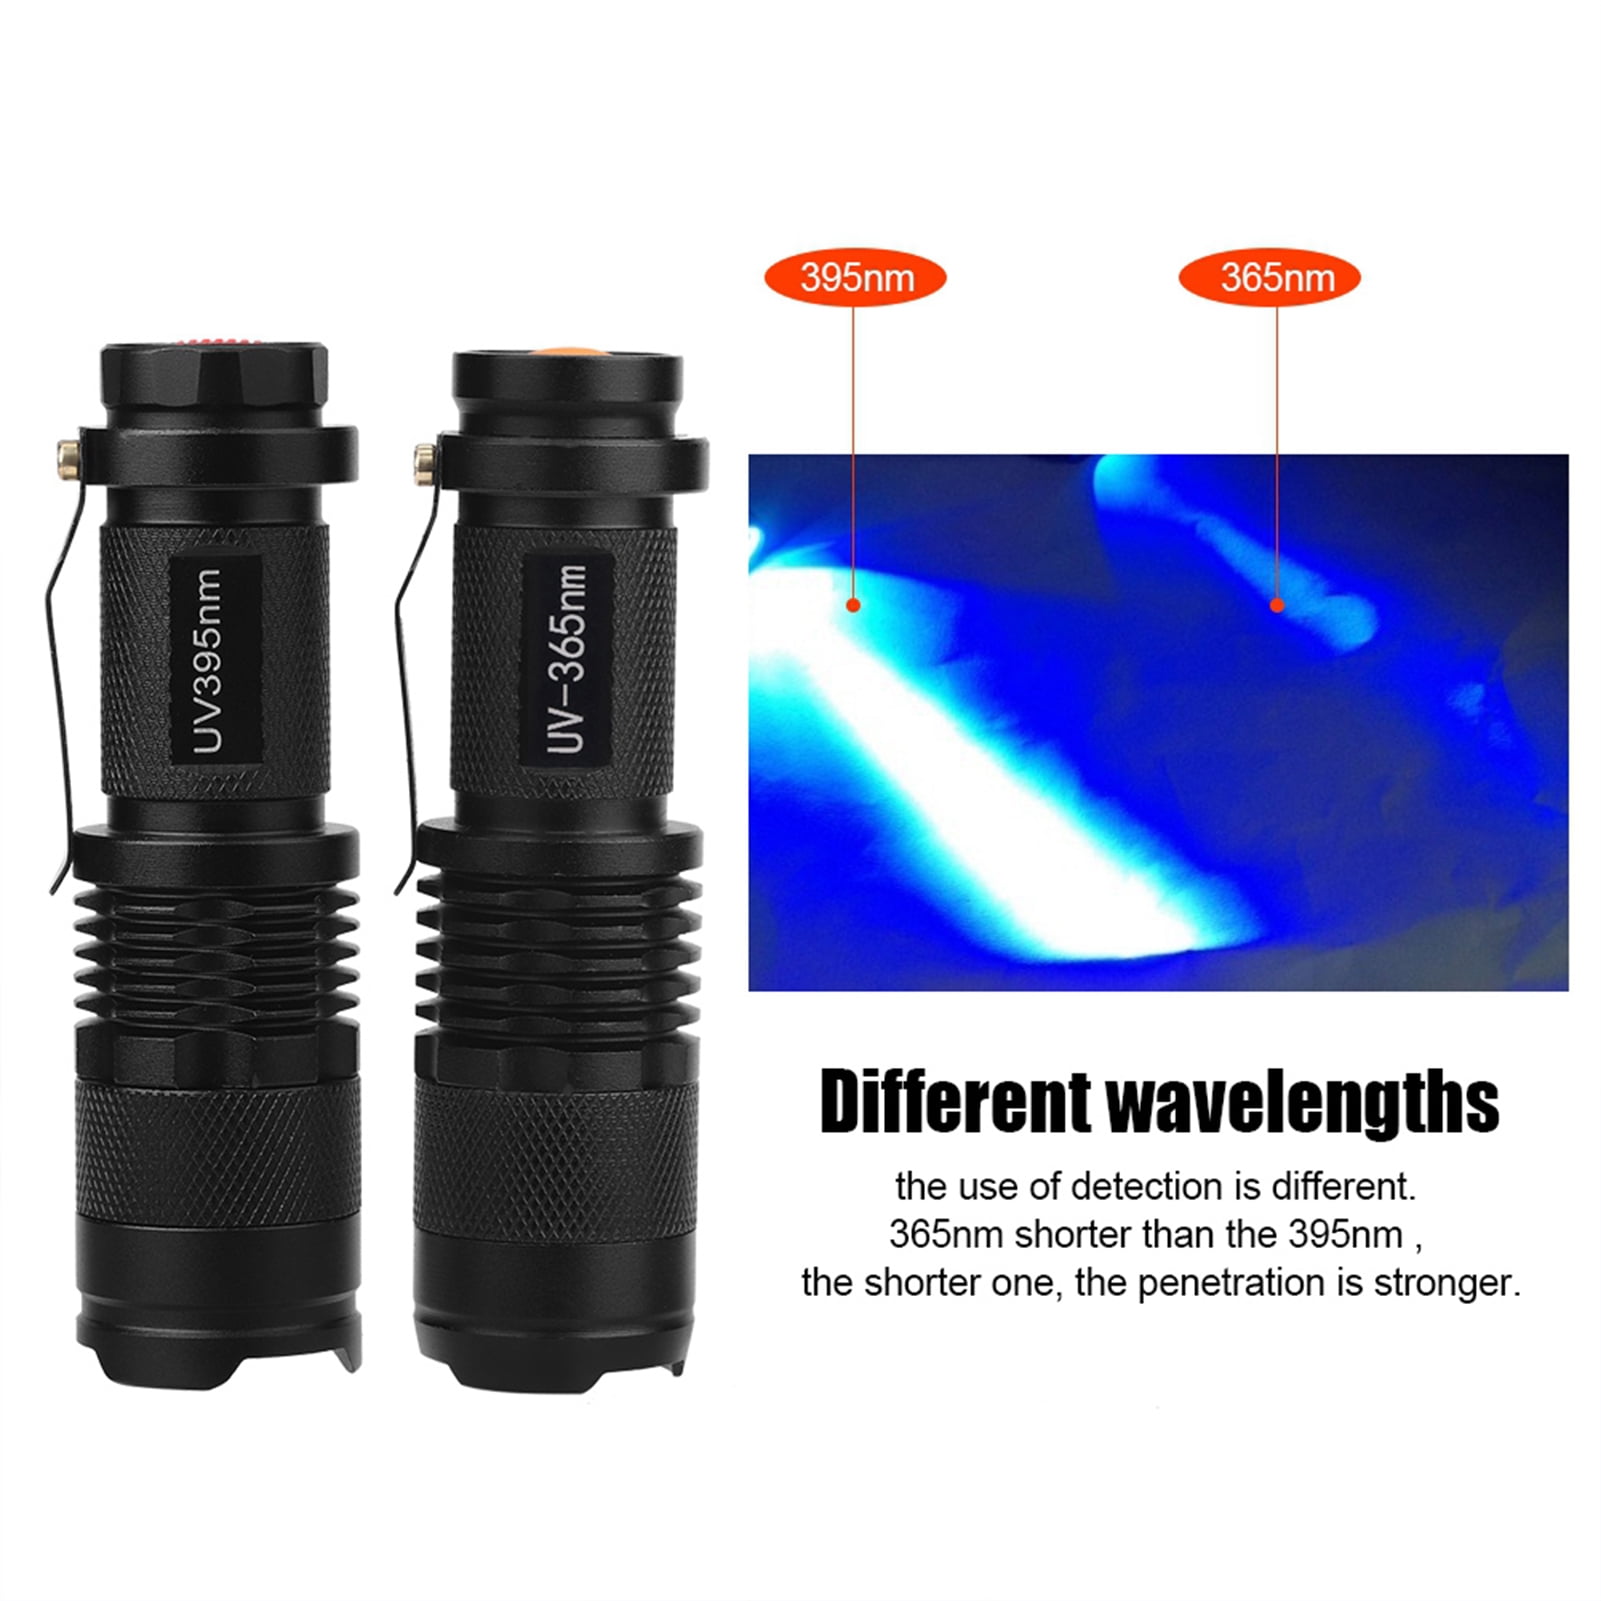 Outdoor Flashlights Camping Hiking Torch Aluminum 365 395nm Fluorescent 